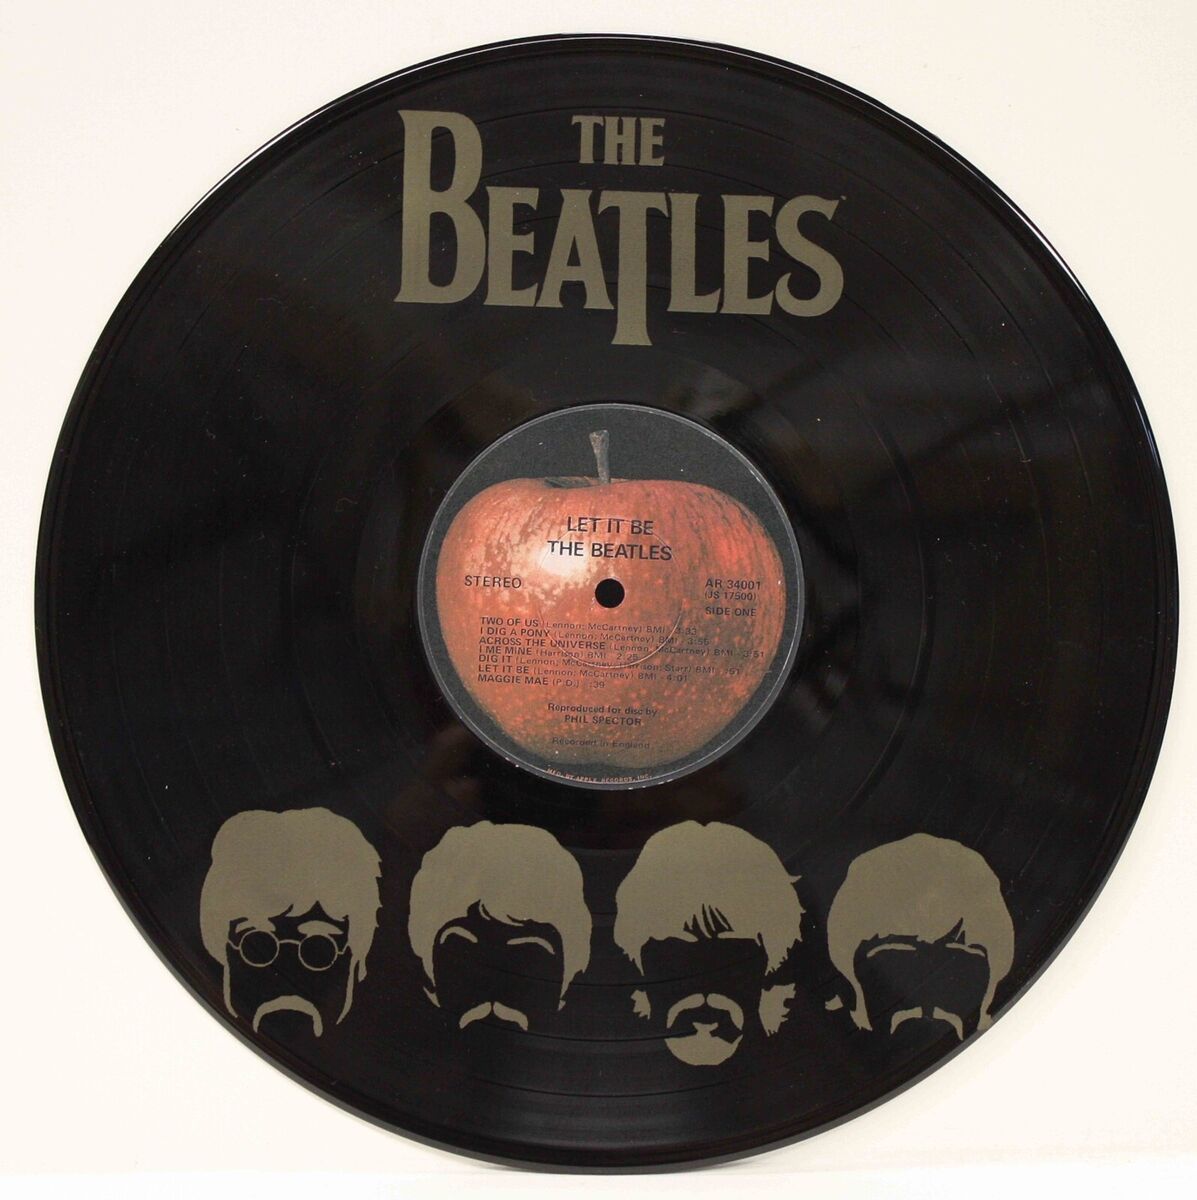 The Beatles Two Of Us Vinyl Record Decorative Wall Art Gift Song